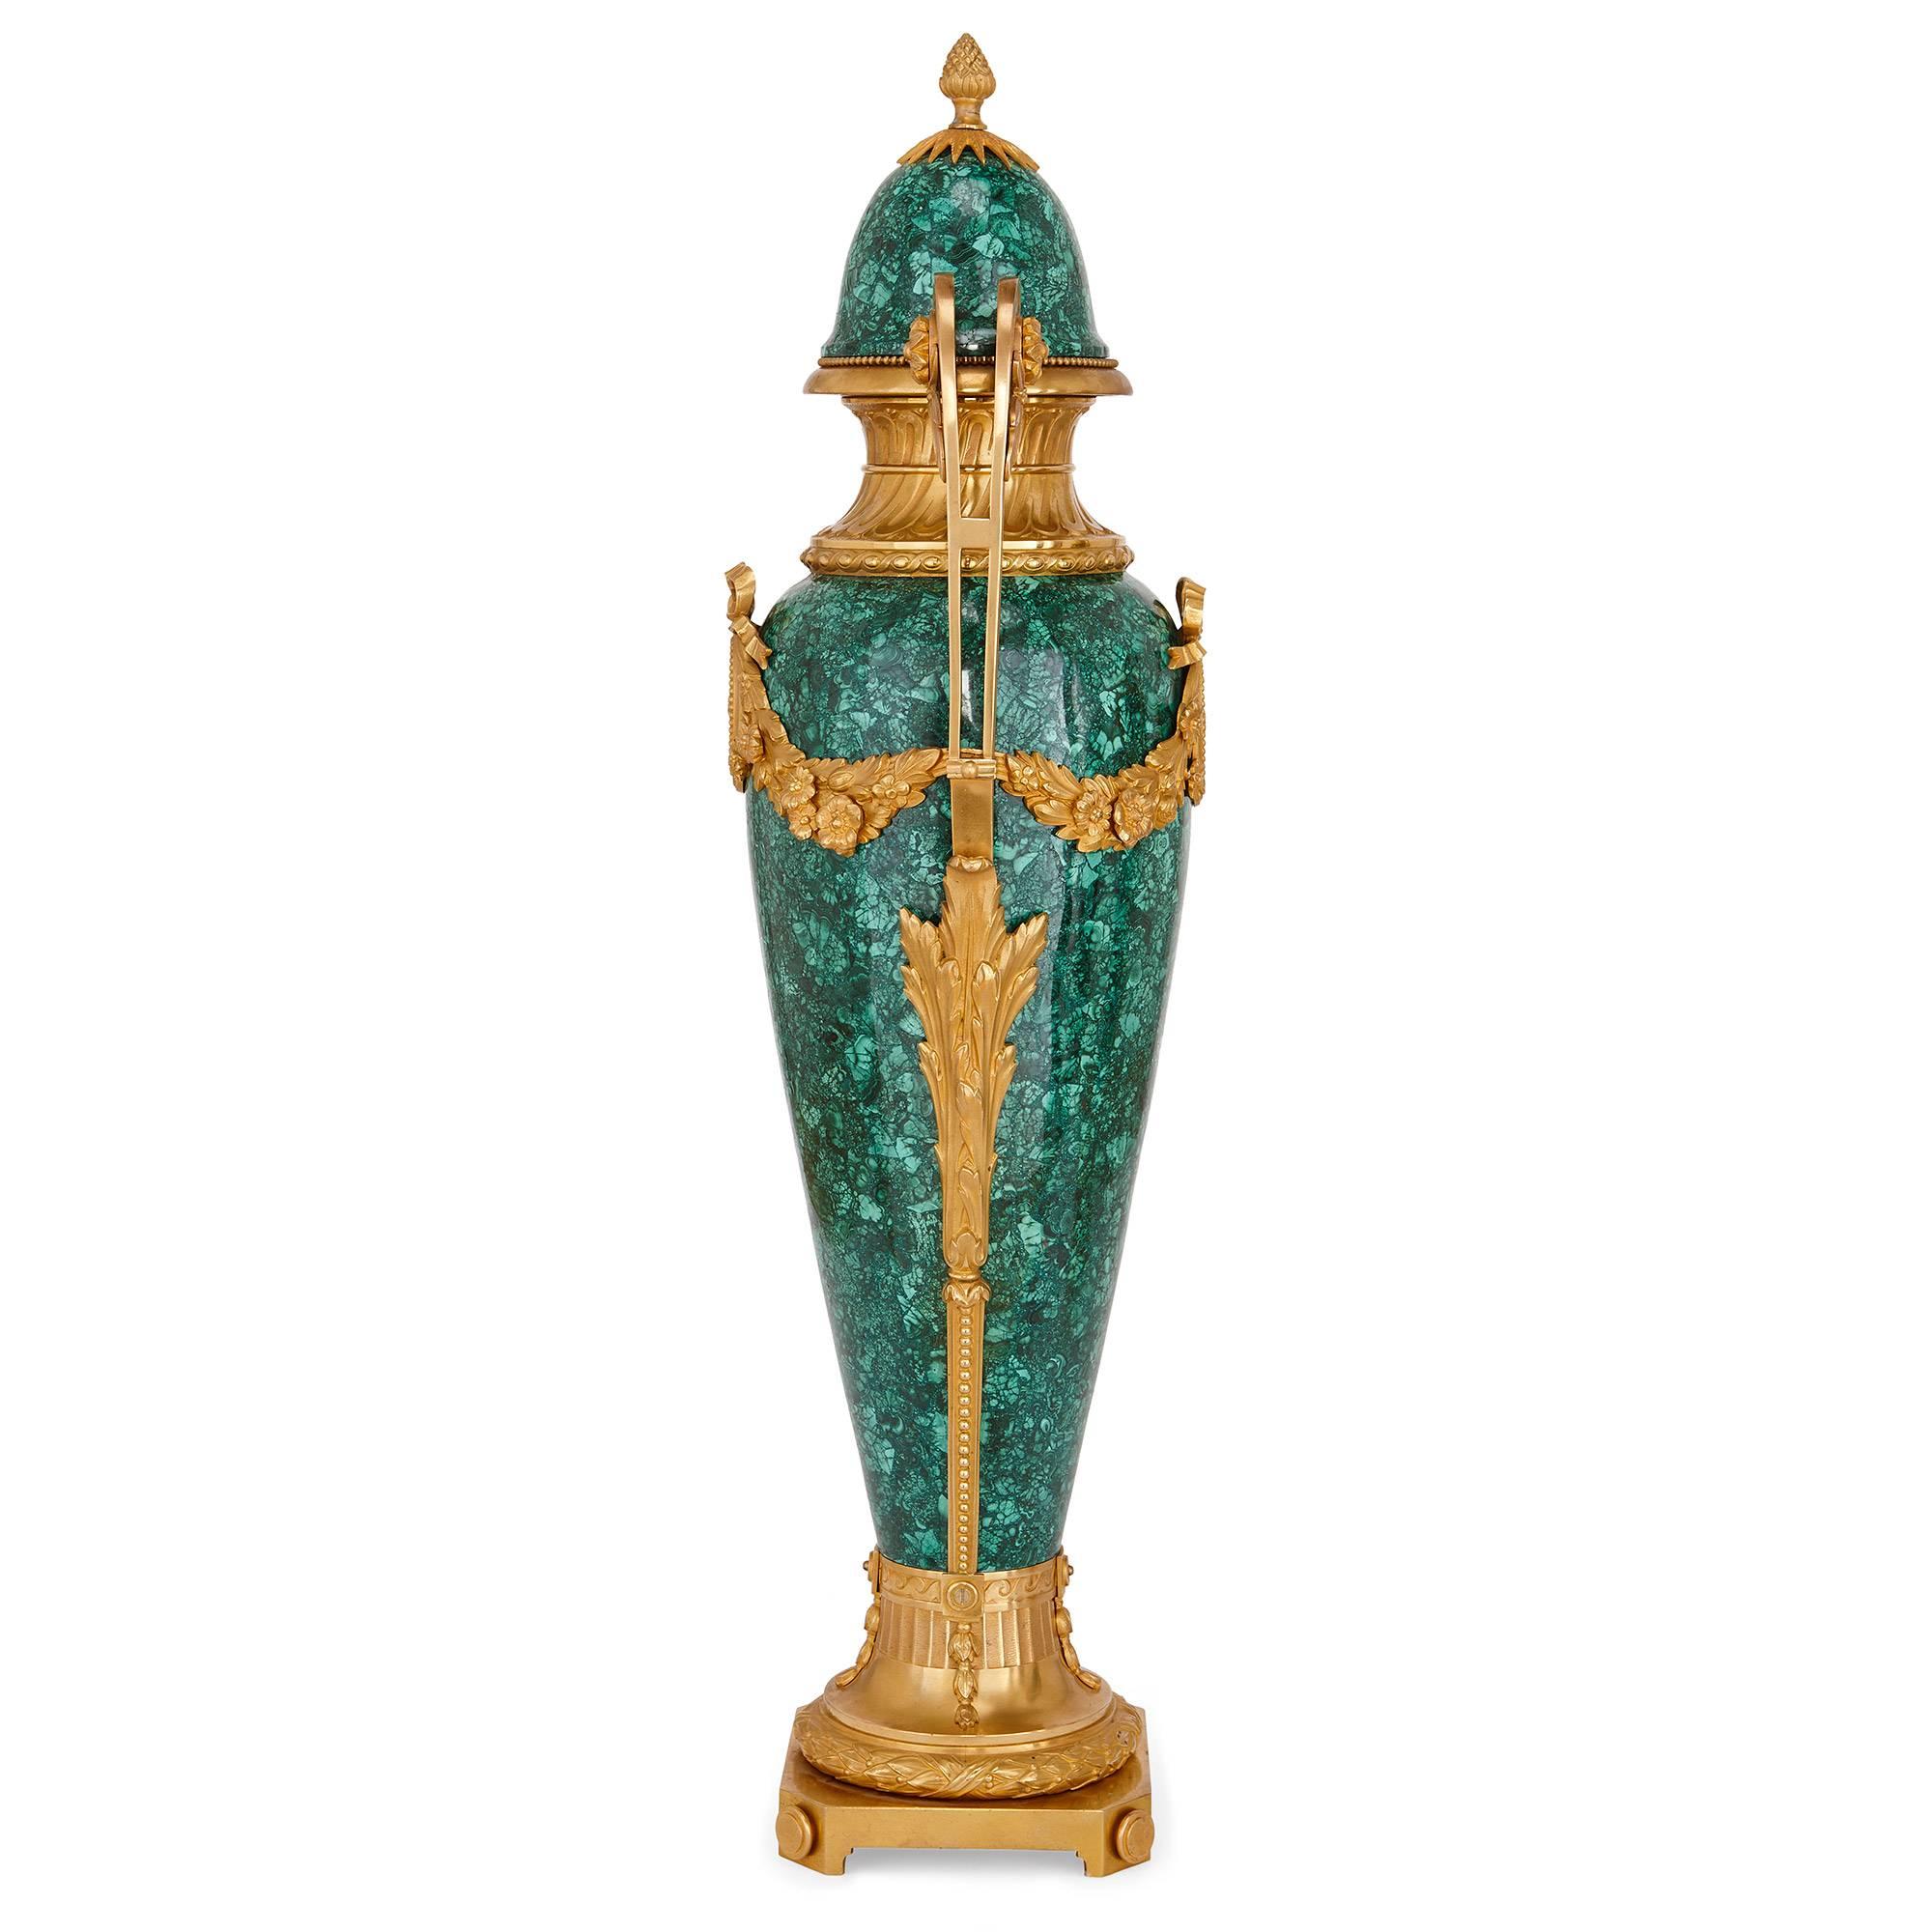 These elegant Neoclassical style vases take a tall, slender ovoid shape, and make an impressive statement in their combination of rich, intense green malachite and luxurious gilt bronze. They are set on square ormolu bases and supported by circular